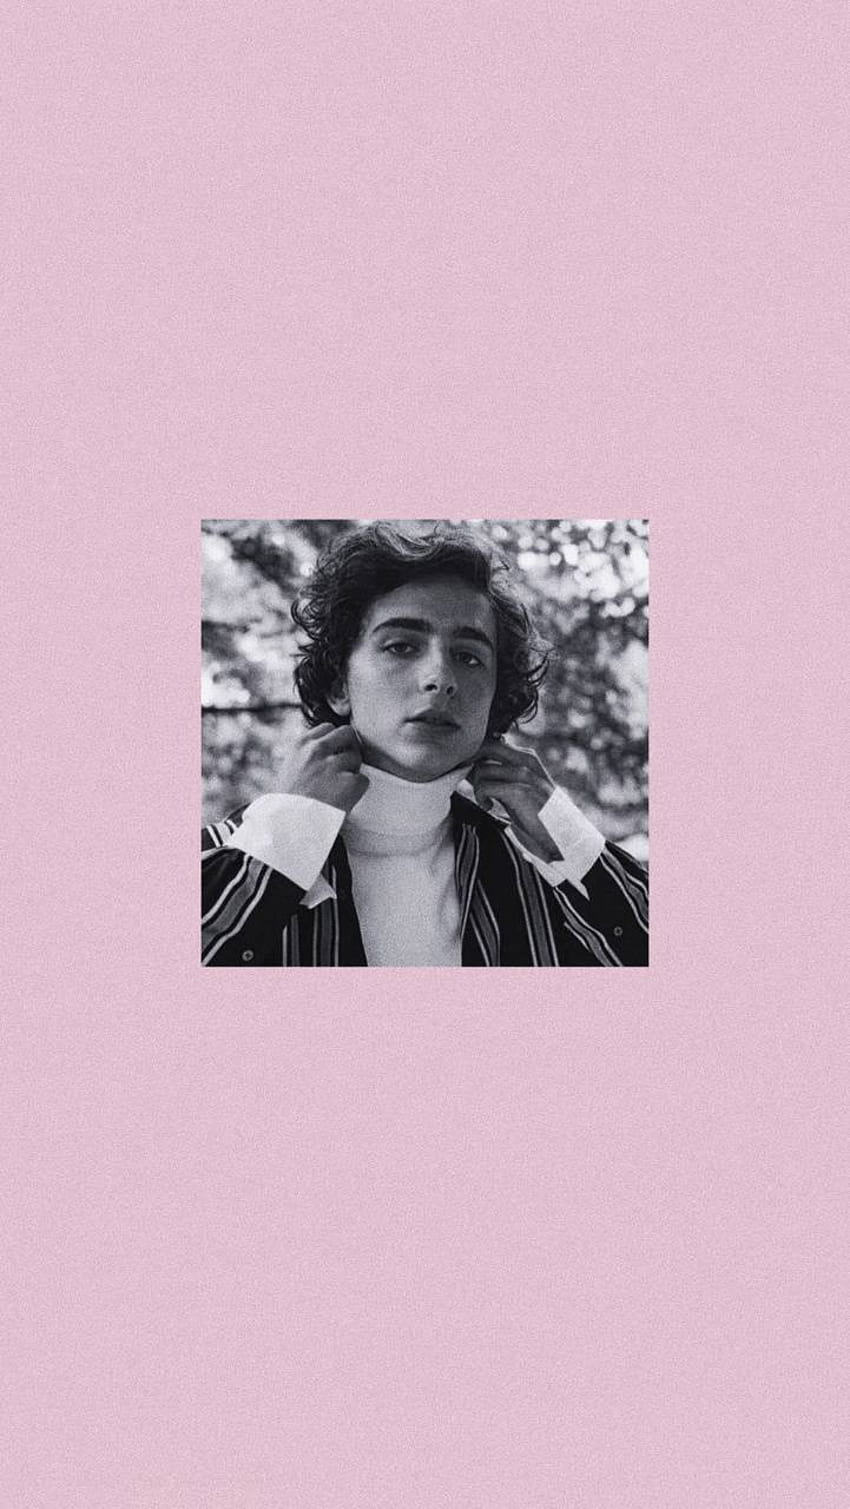 A person in black and white on pink background - Timothee Chalamet